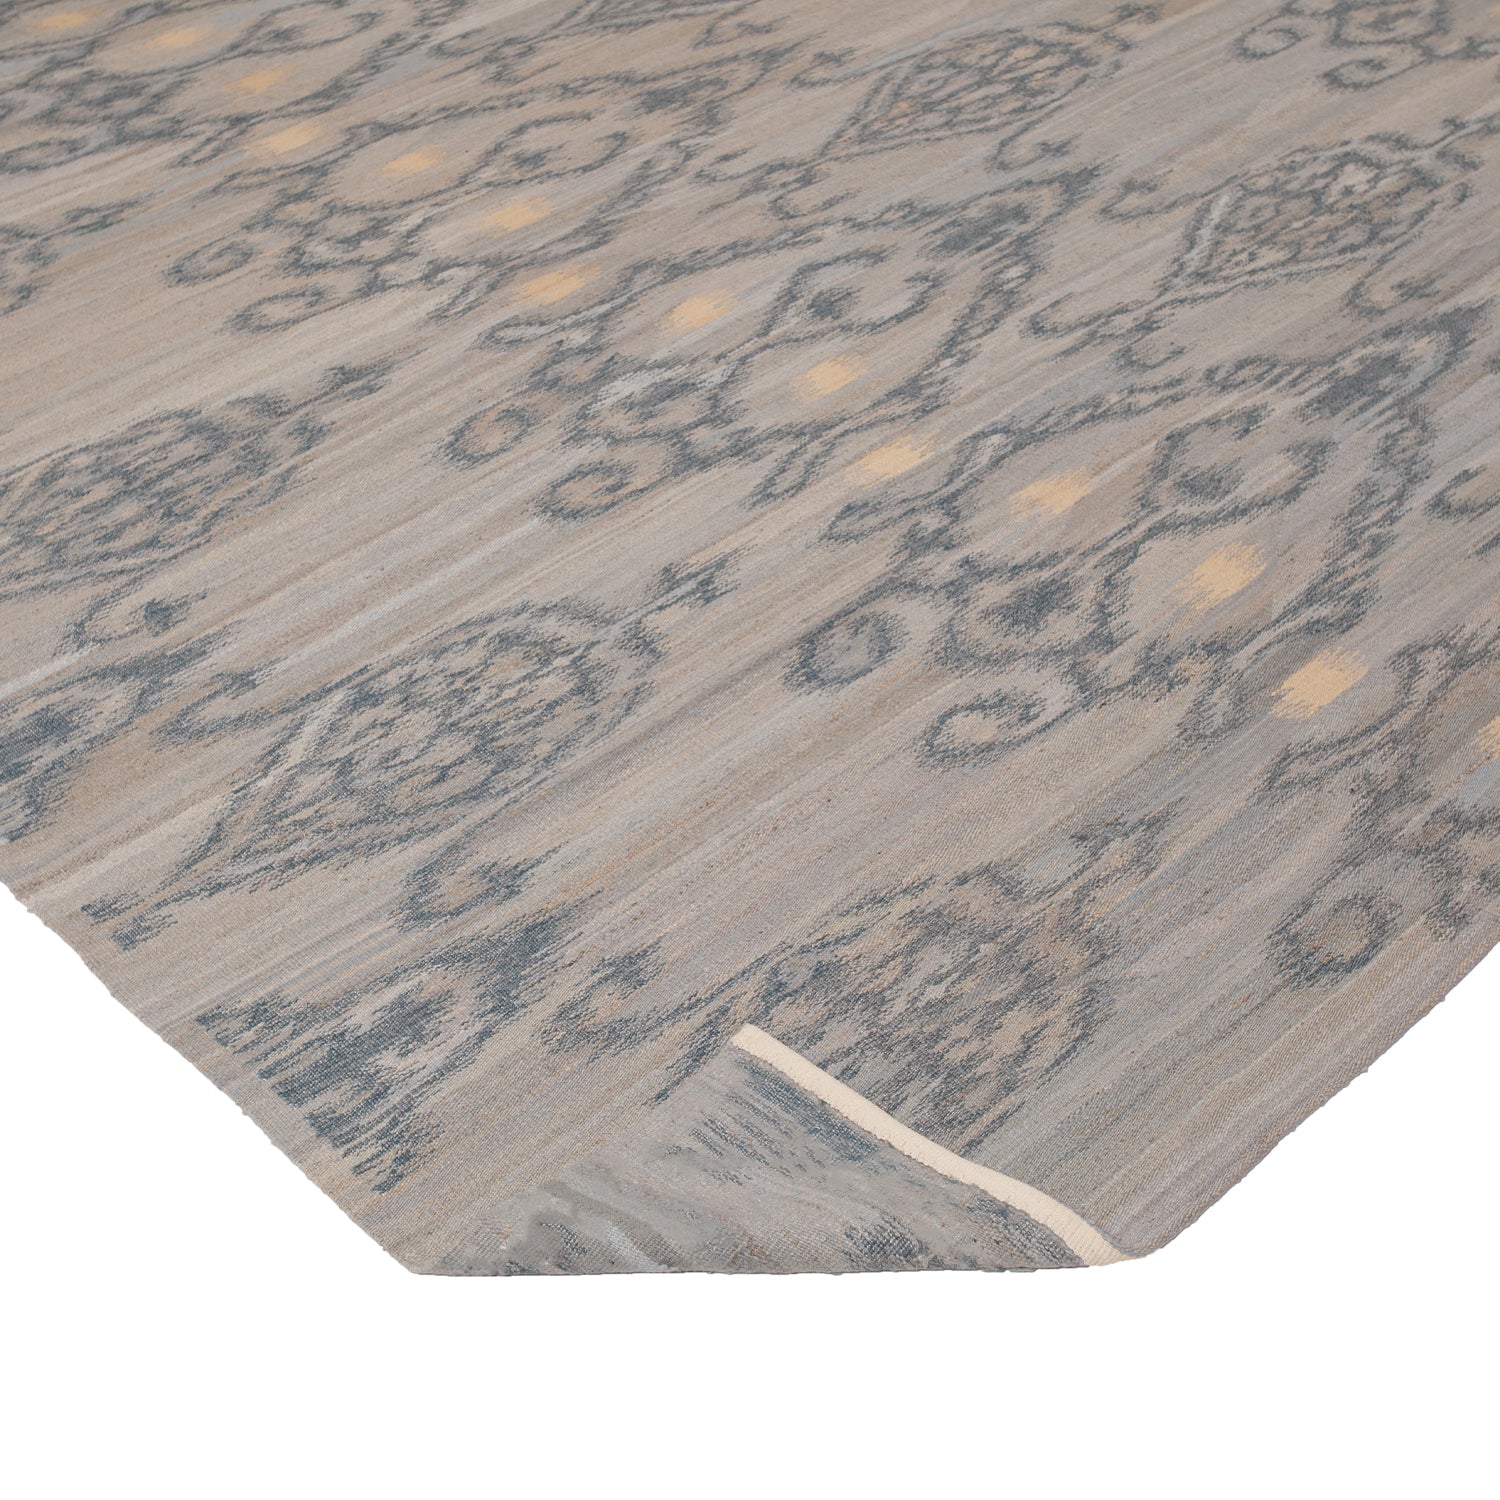 Elegant vintage-style carpet with intricate grey and gold pattern.